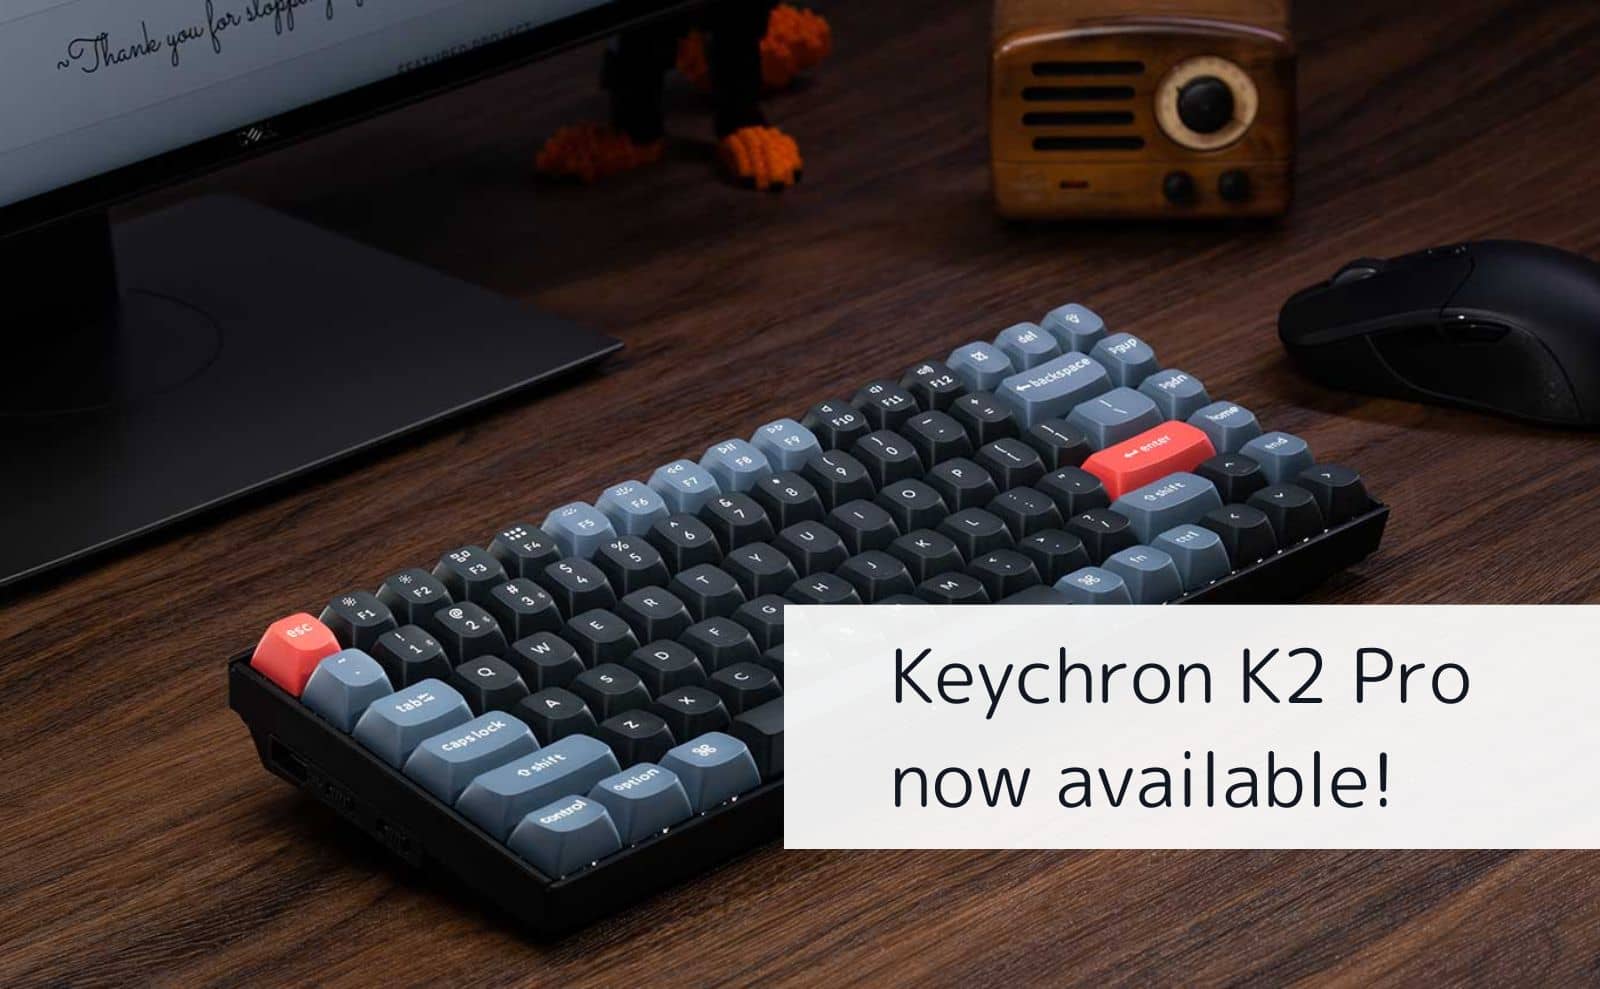 Keychron K2 Pro now available